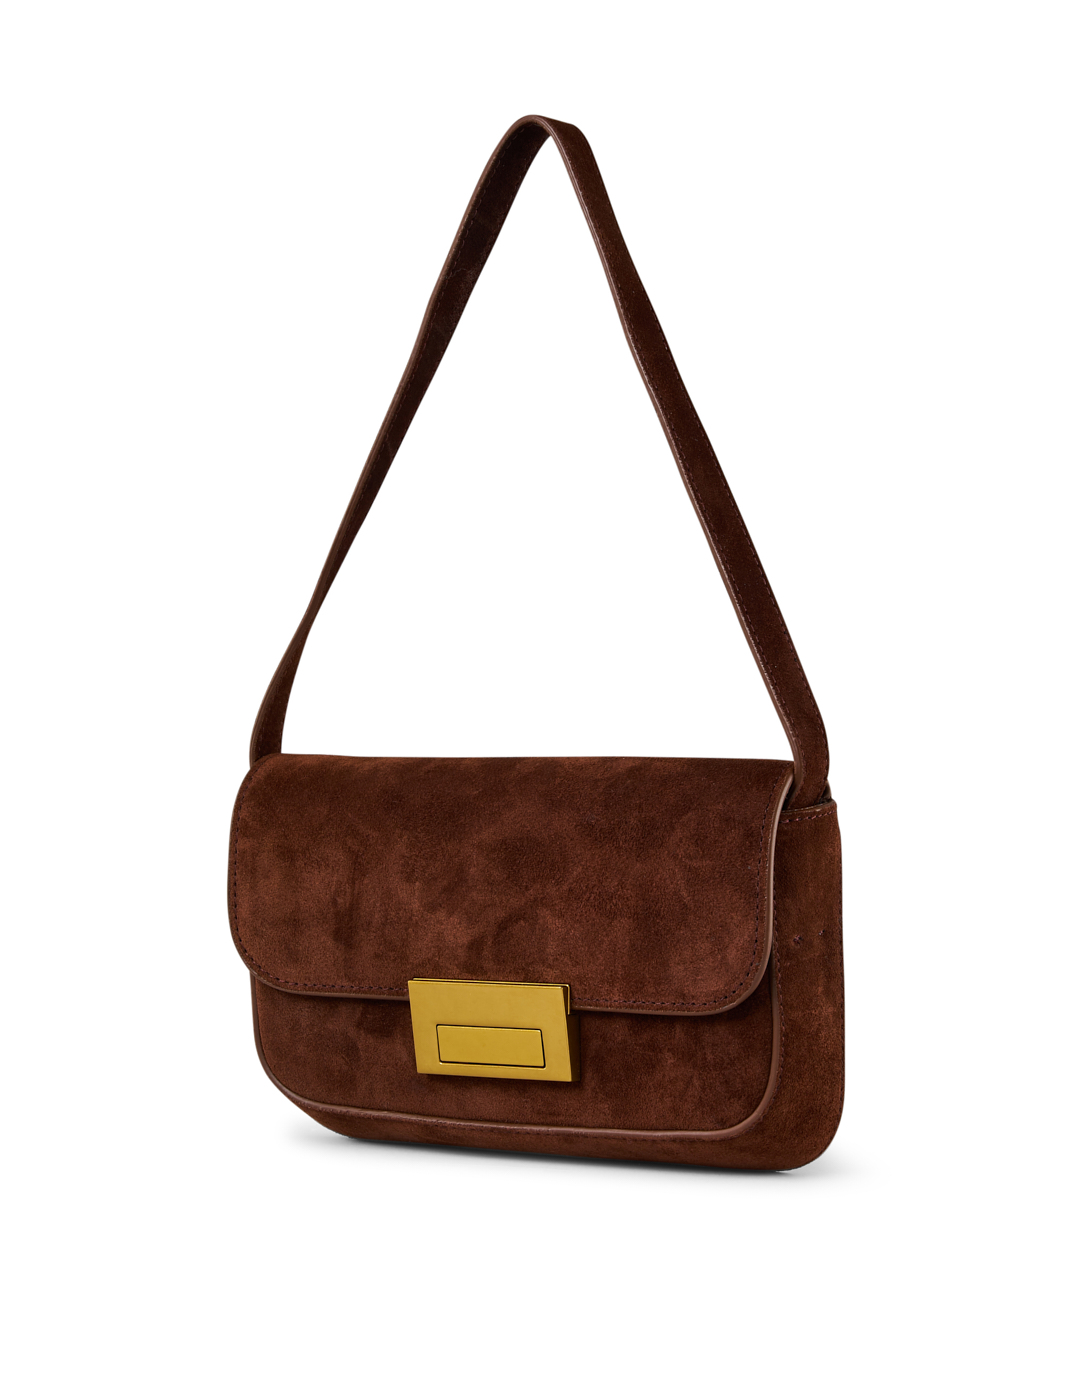 Moyen Taupe Leather Messenger Bag by Clare V. on Halsbrook in 2023